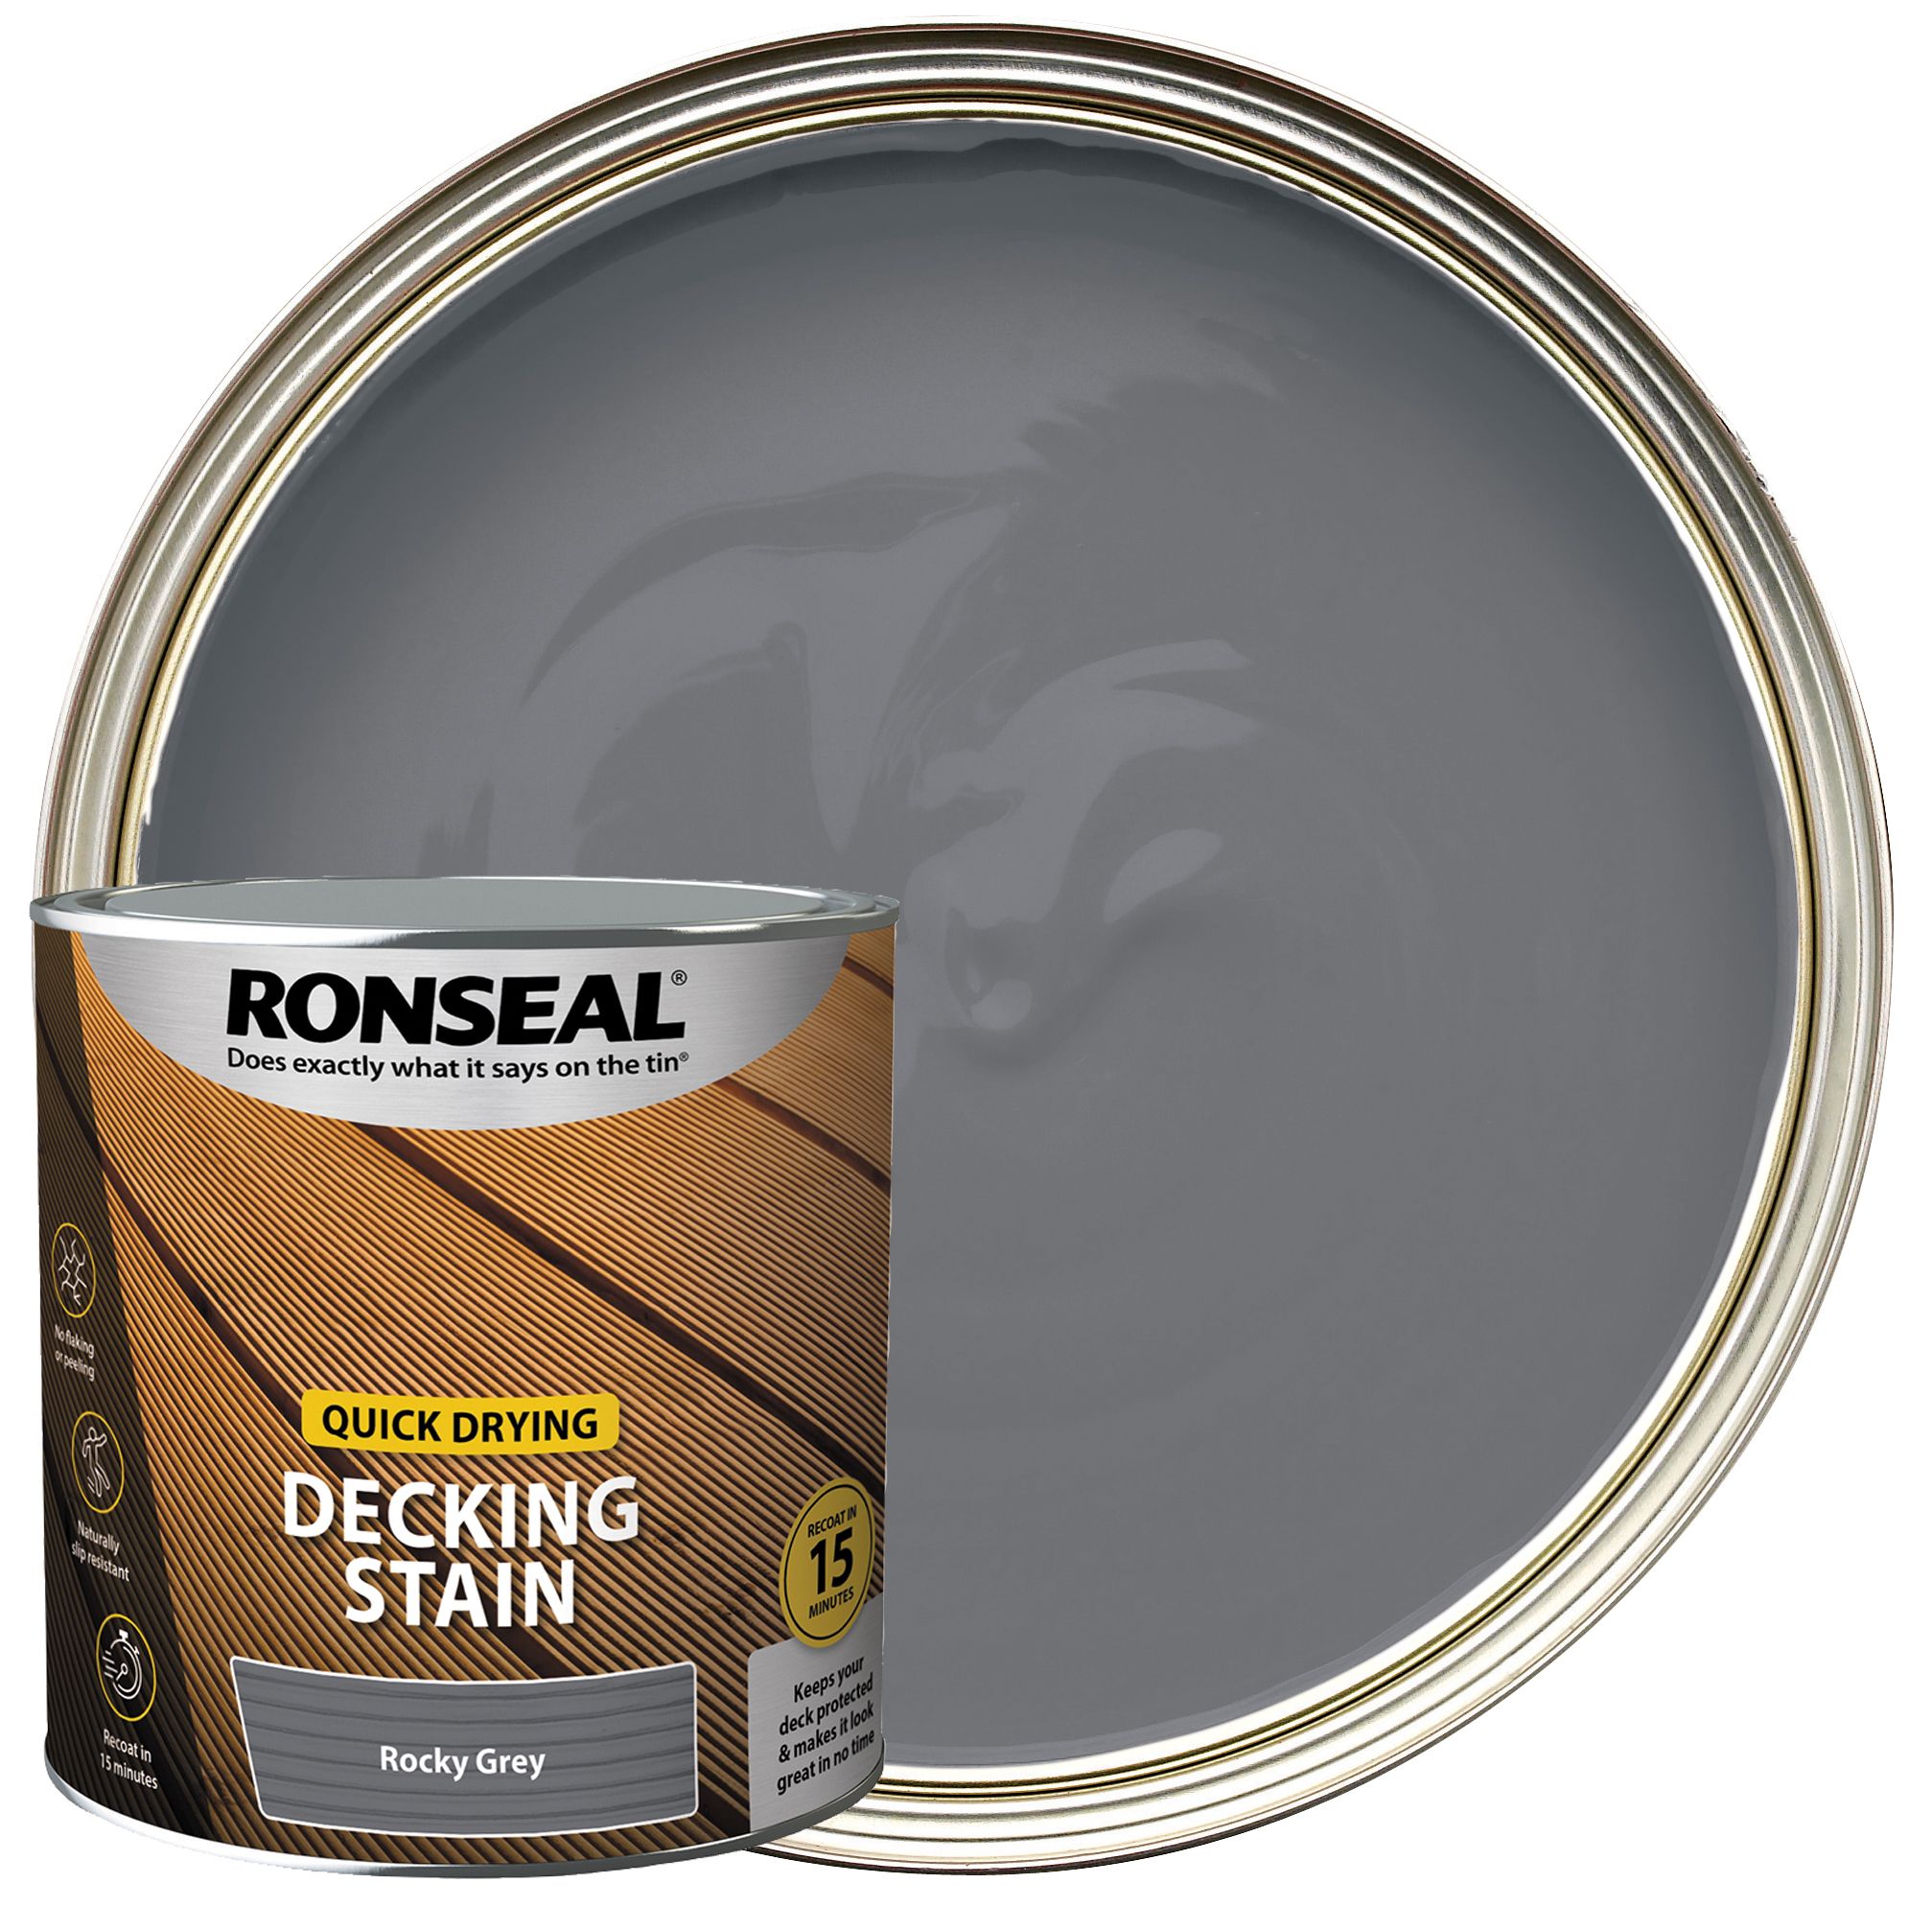 Ronseal Rocky Grey Quick Drying Decking Stain - 2.5L